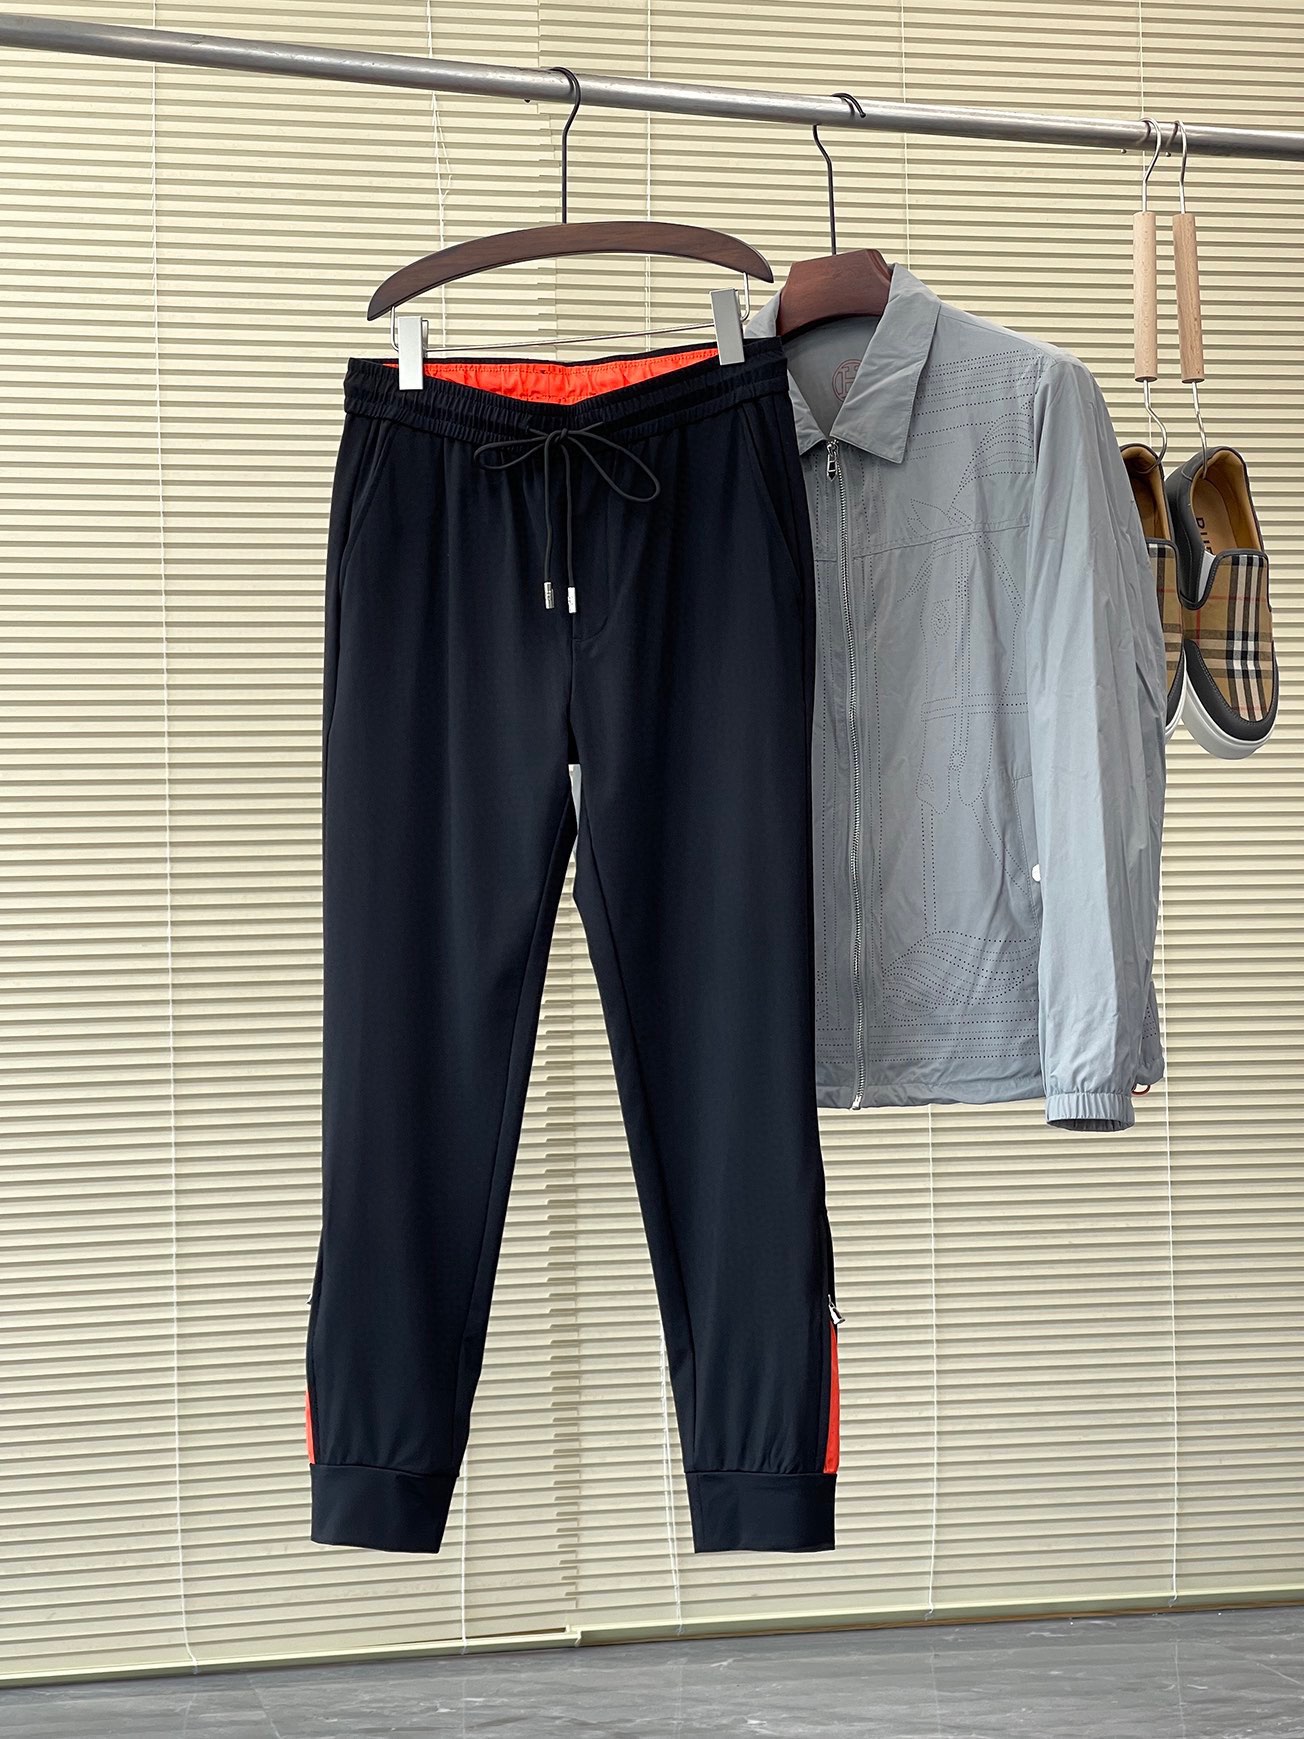 Hermes Clothing Pants & Trousers Black Grey Khaki Embroidery Men Polyester Spandex Spring/Summer Collection Fashion Casual